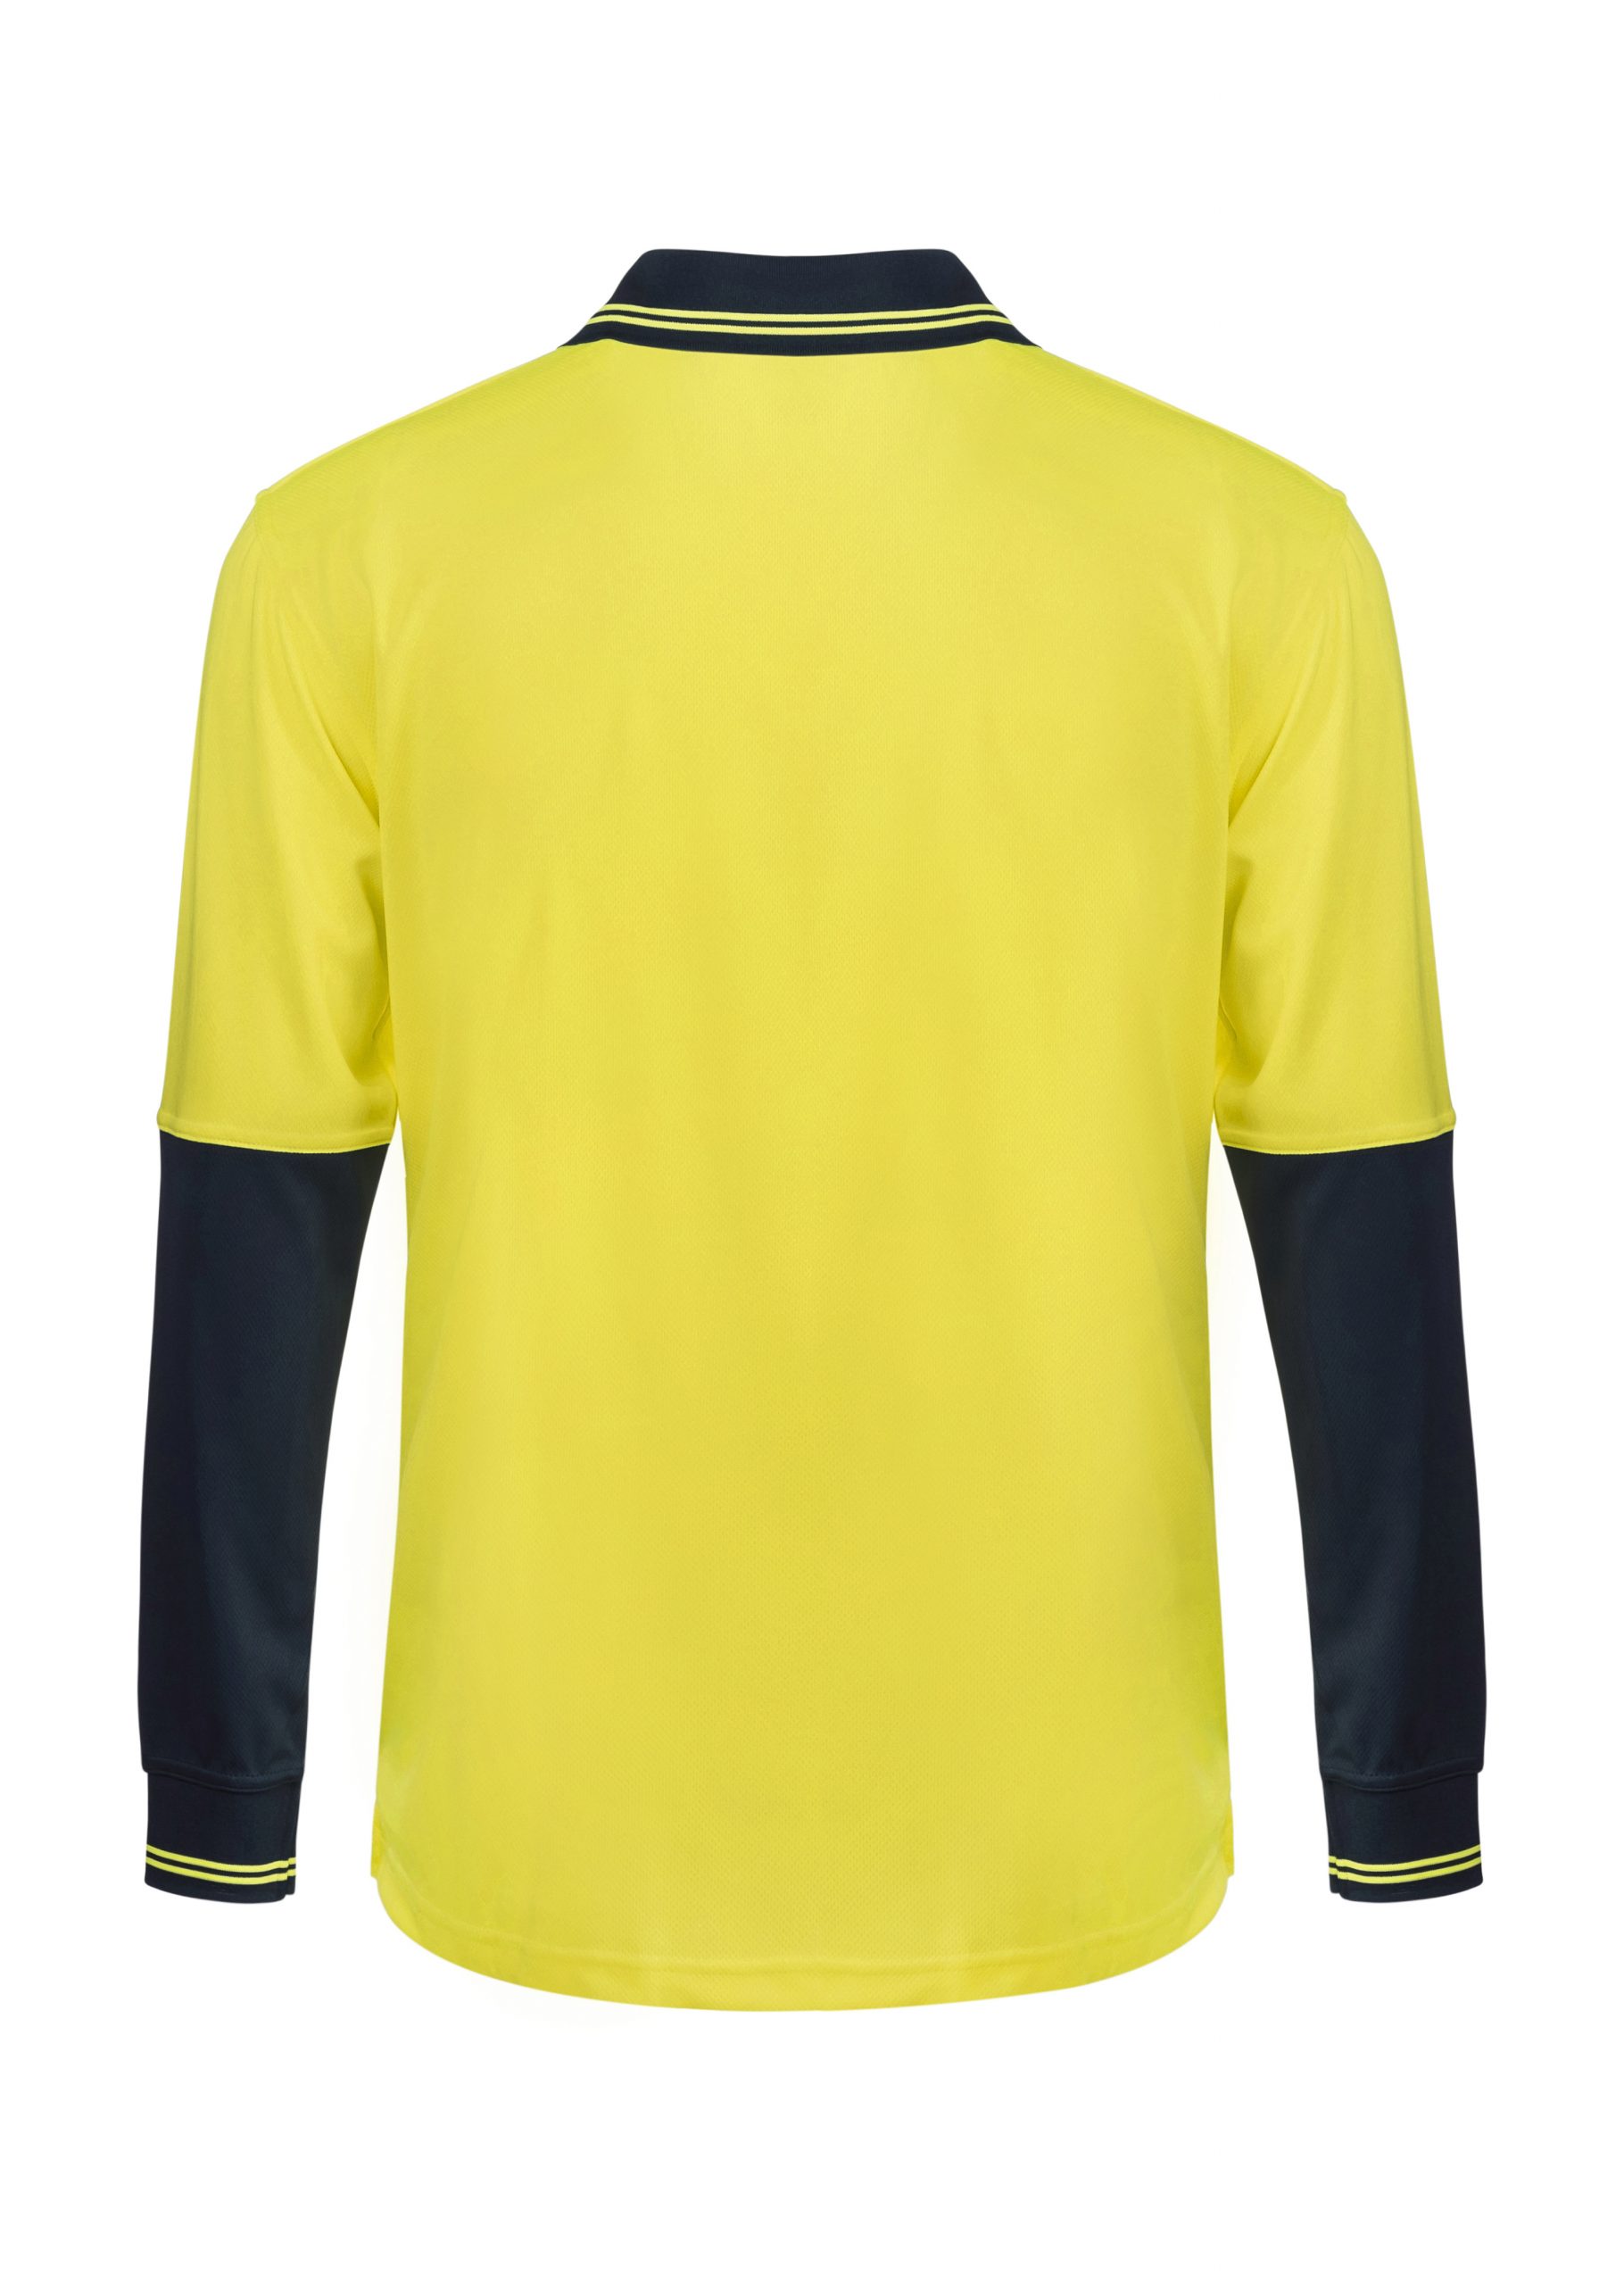 WSP202 HI VIS TWO TONE LONG SLEEVE MICROMESH POLO WITH POCKET NY2